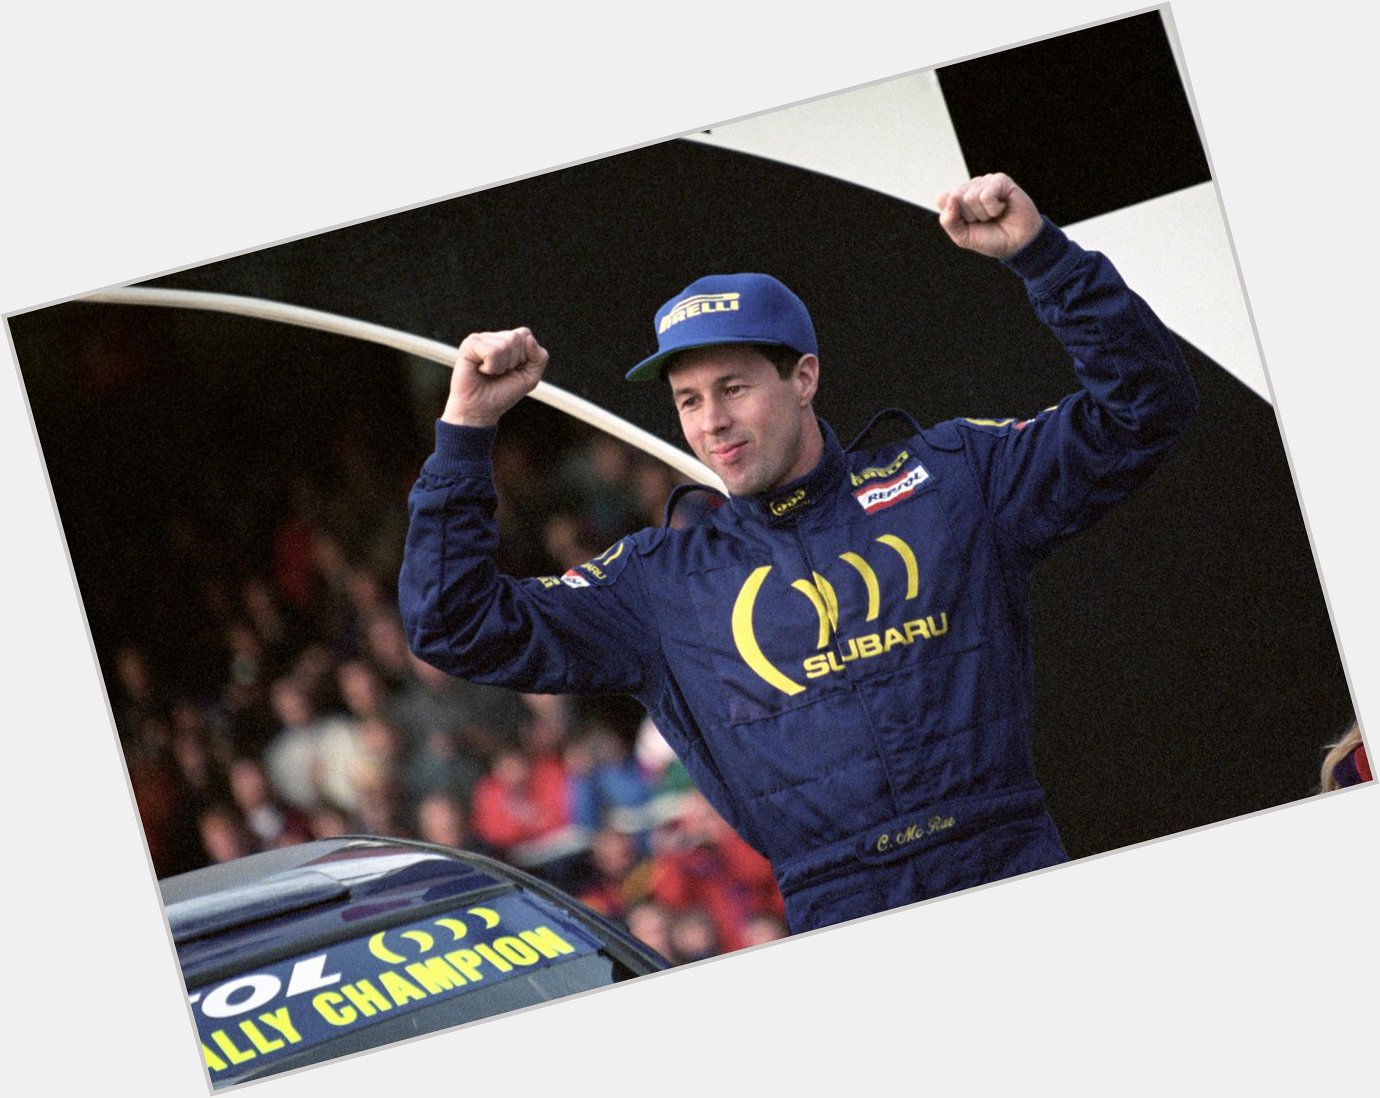         \"If in doubt, flat out.\"

Happy birthday to the legendary Colin McRae, who would have turned 51 today! 